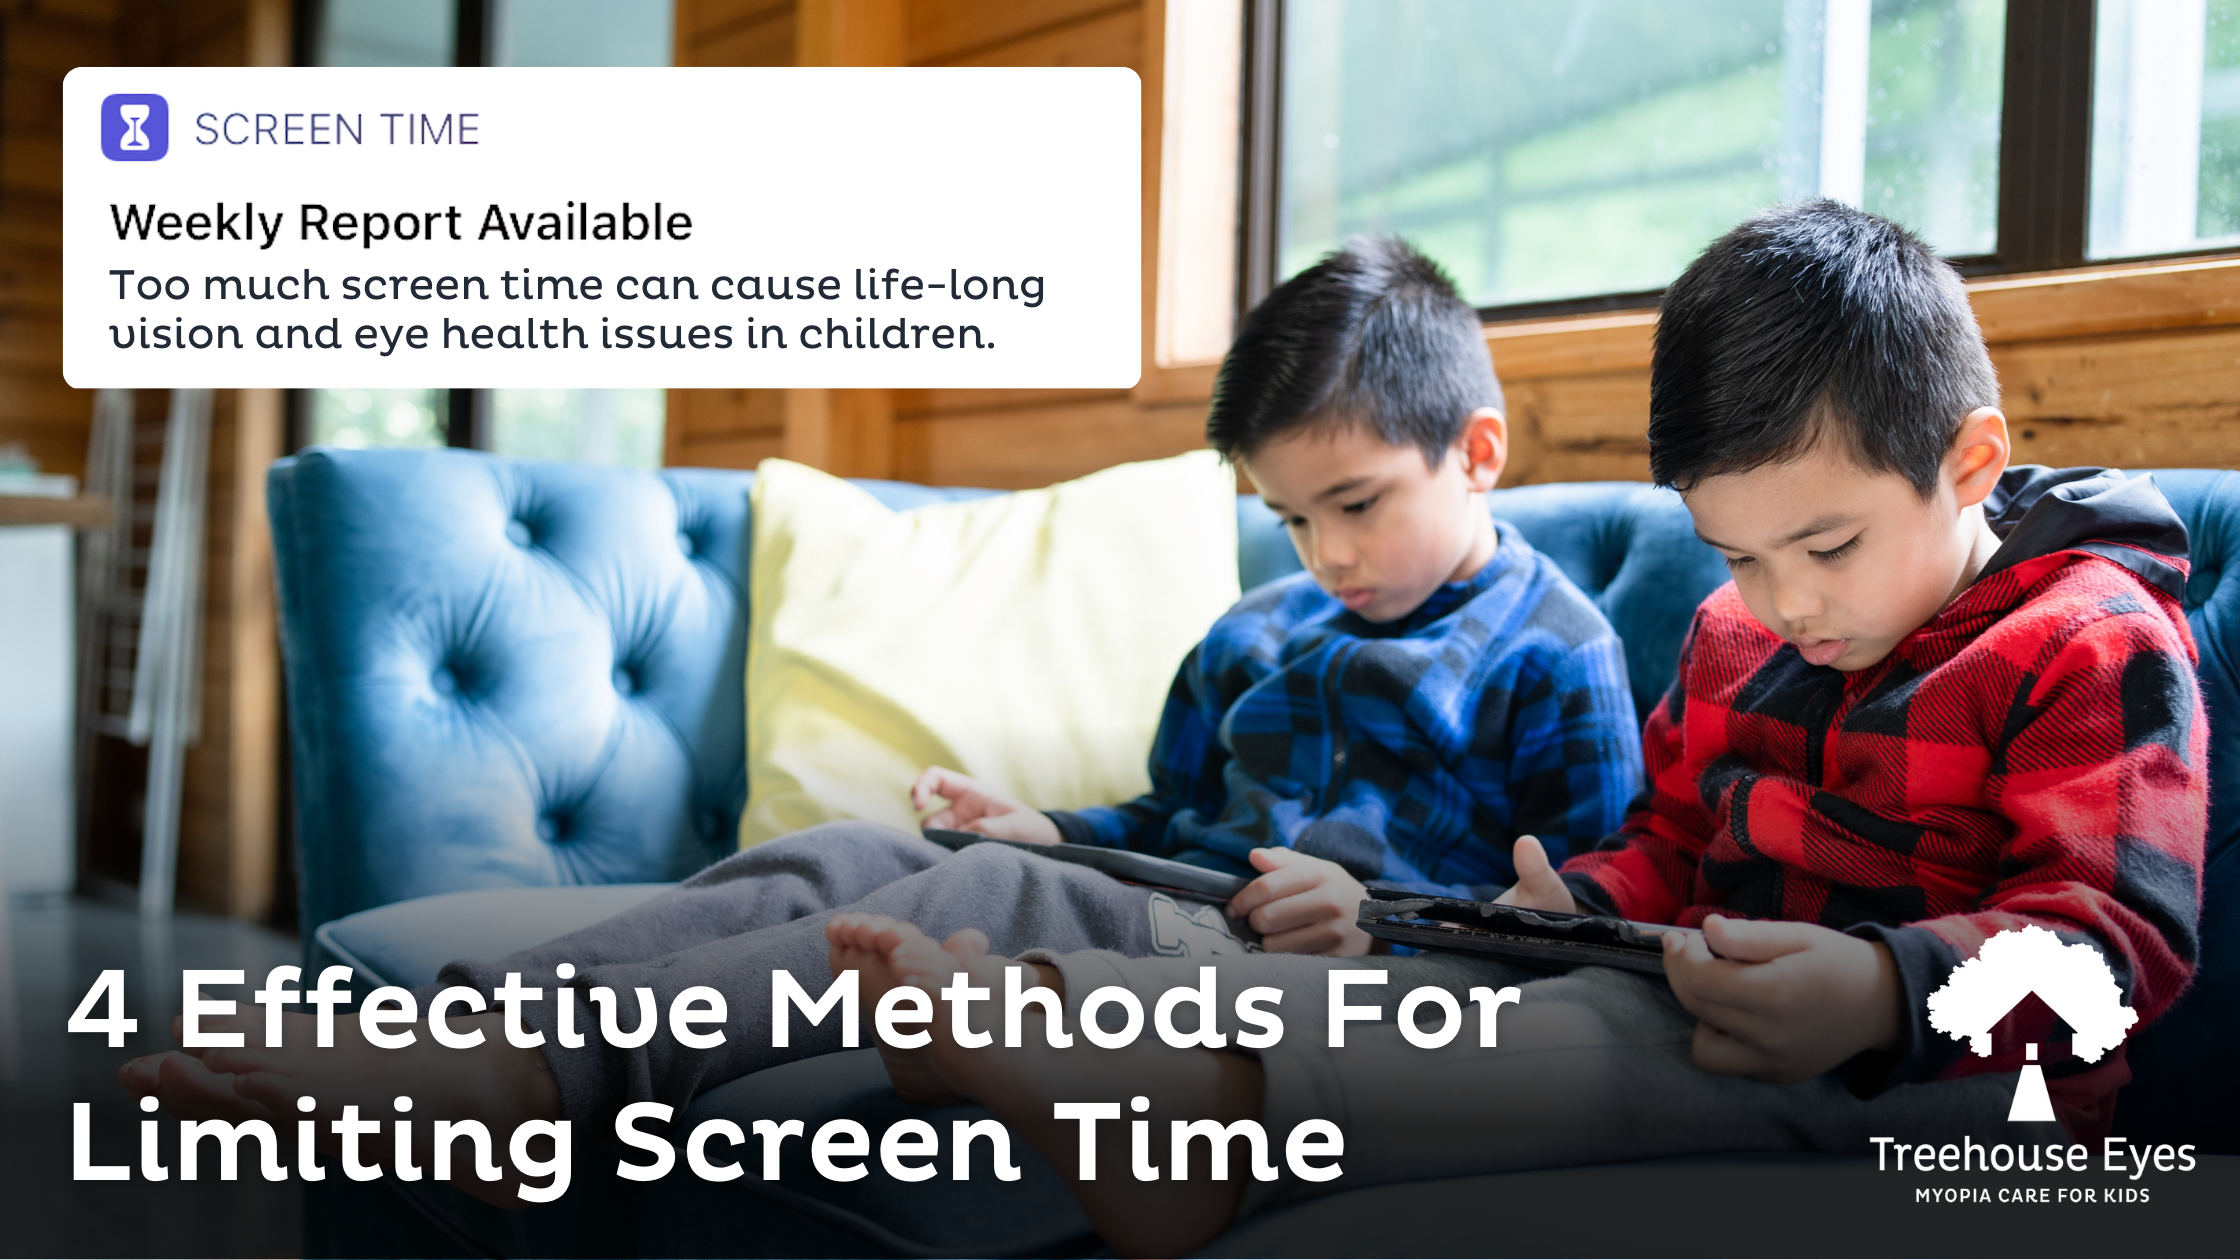 Limiting Screen Time for better vision